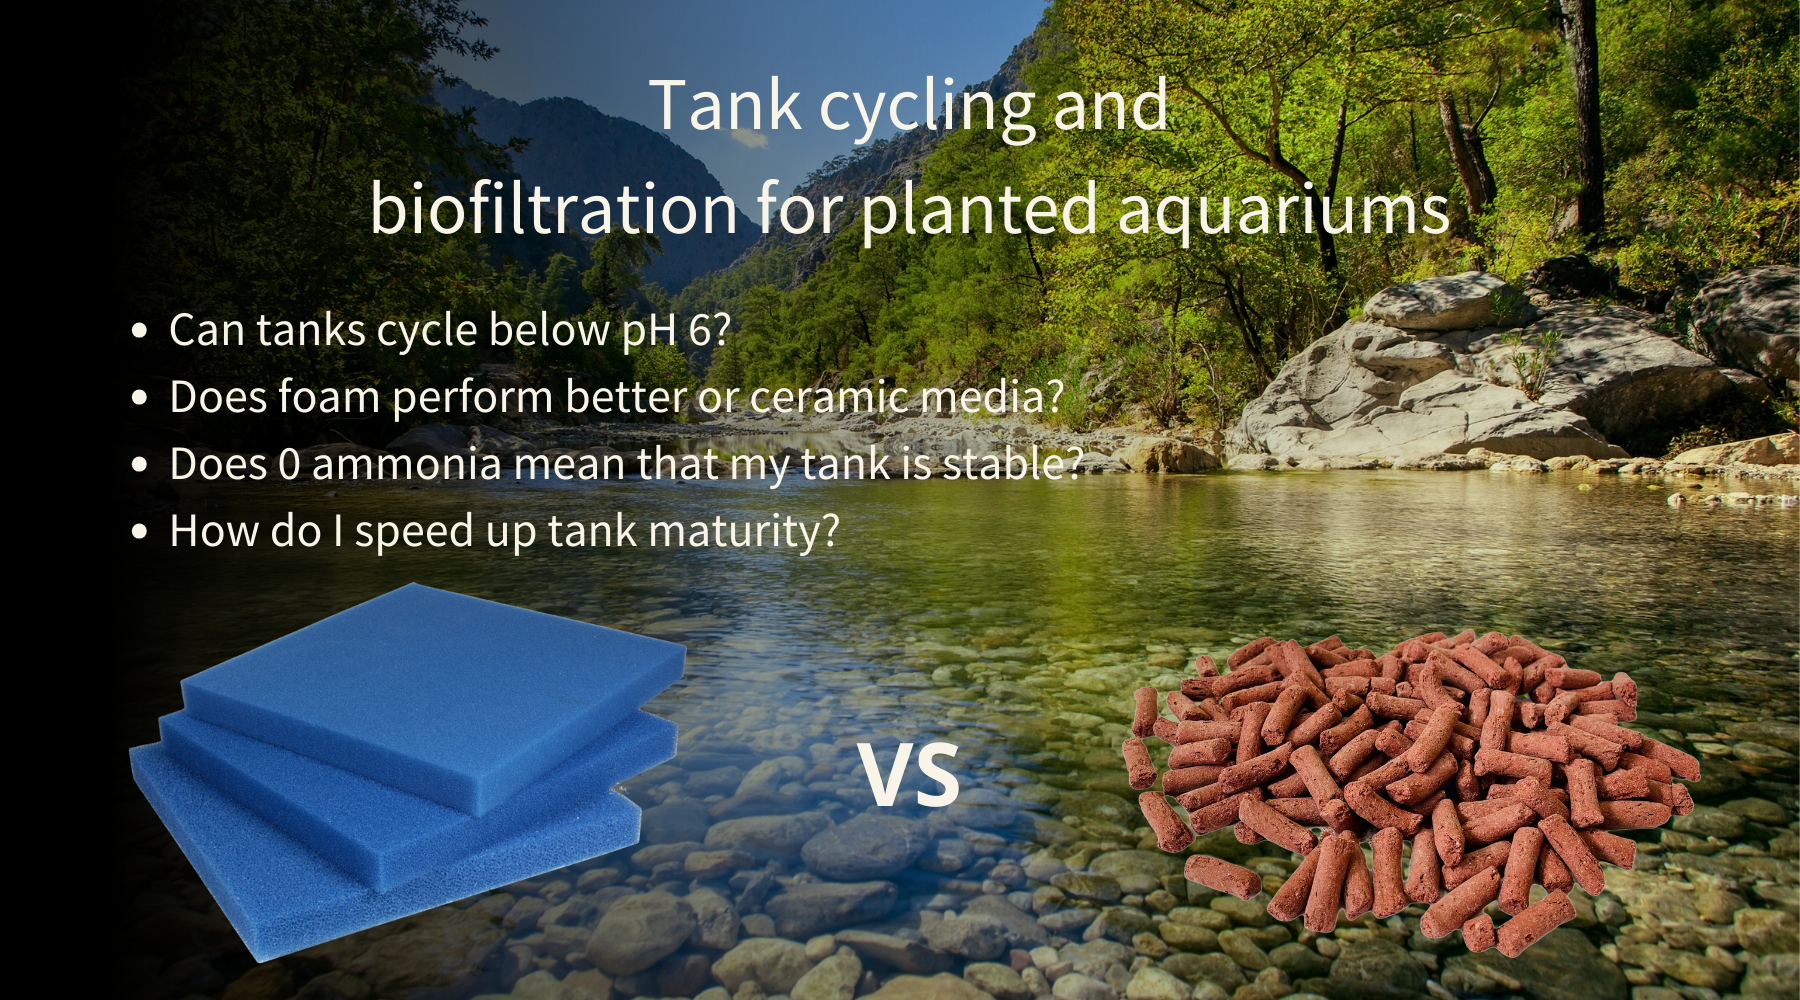 Tank cycling and biological maturity in planted aquariums